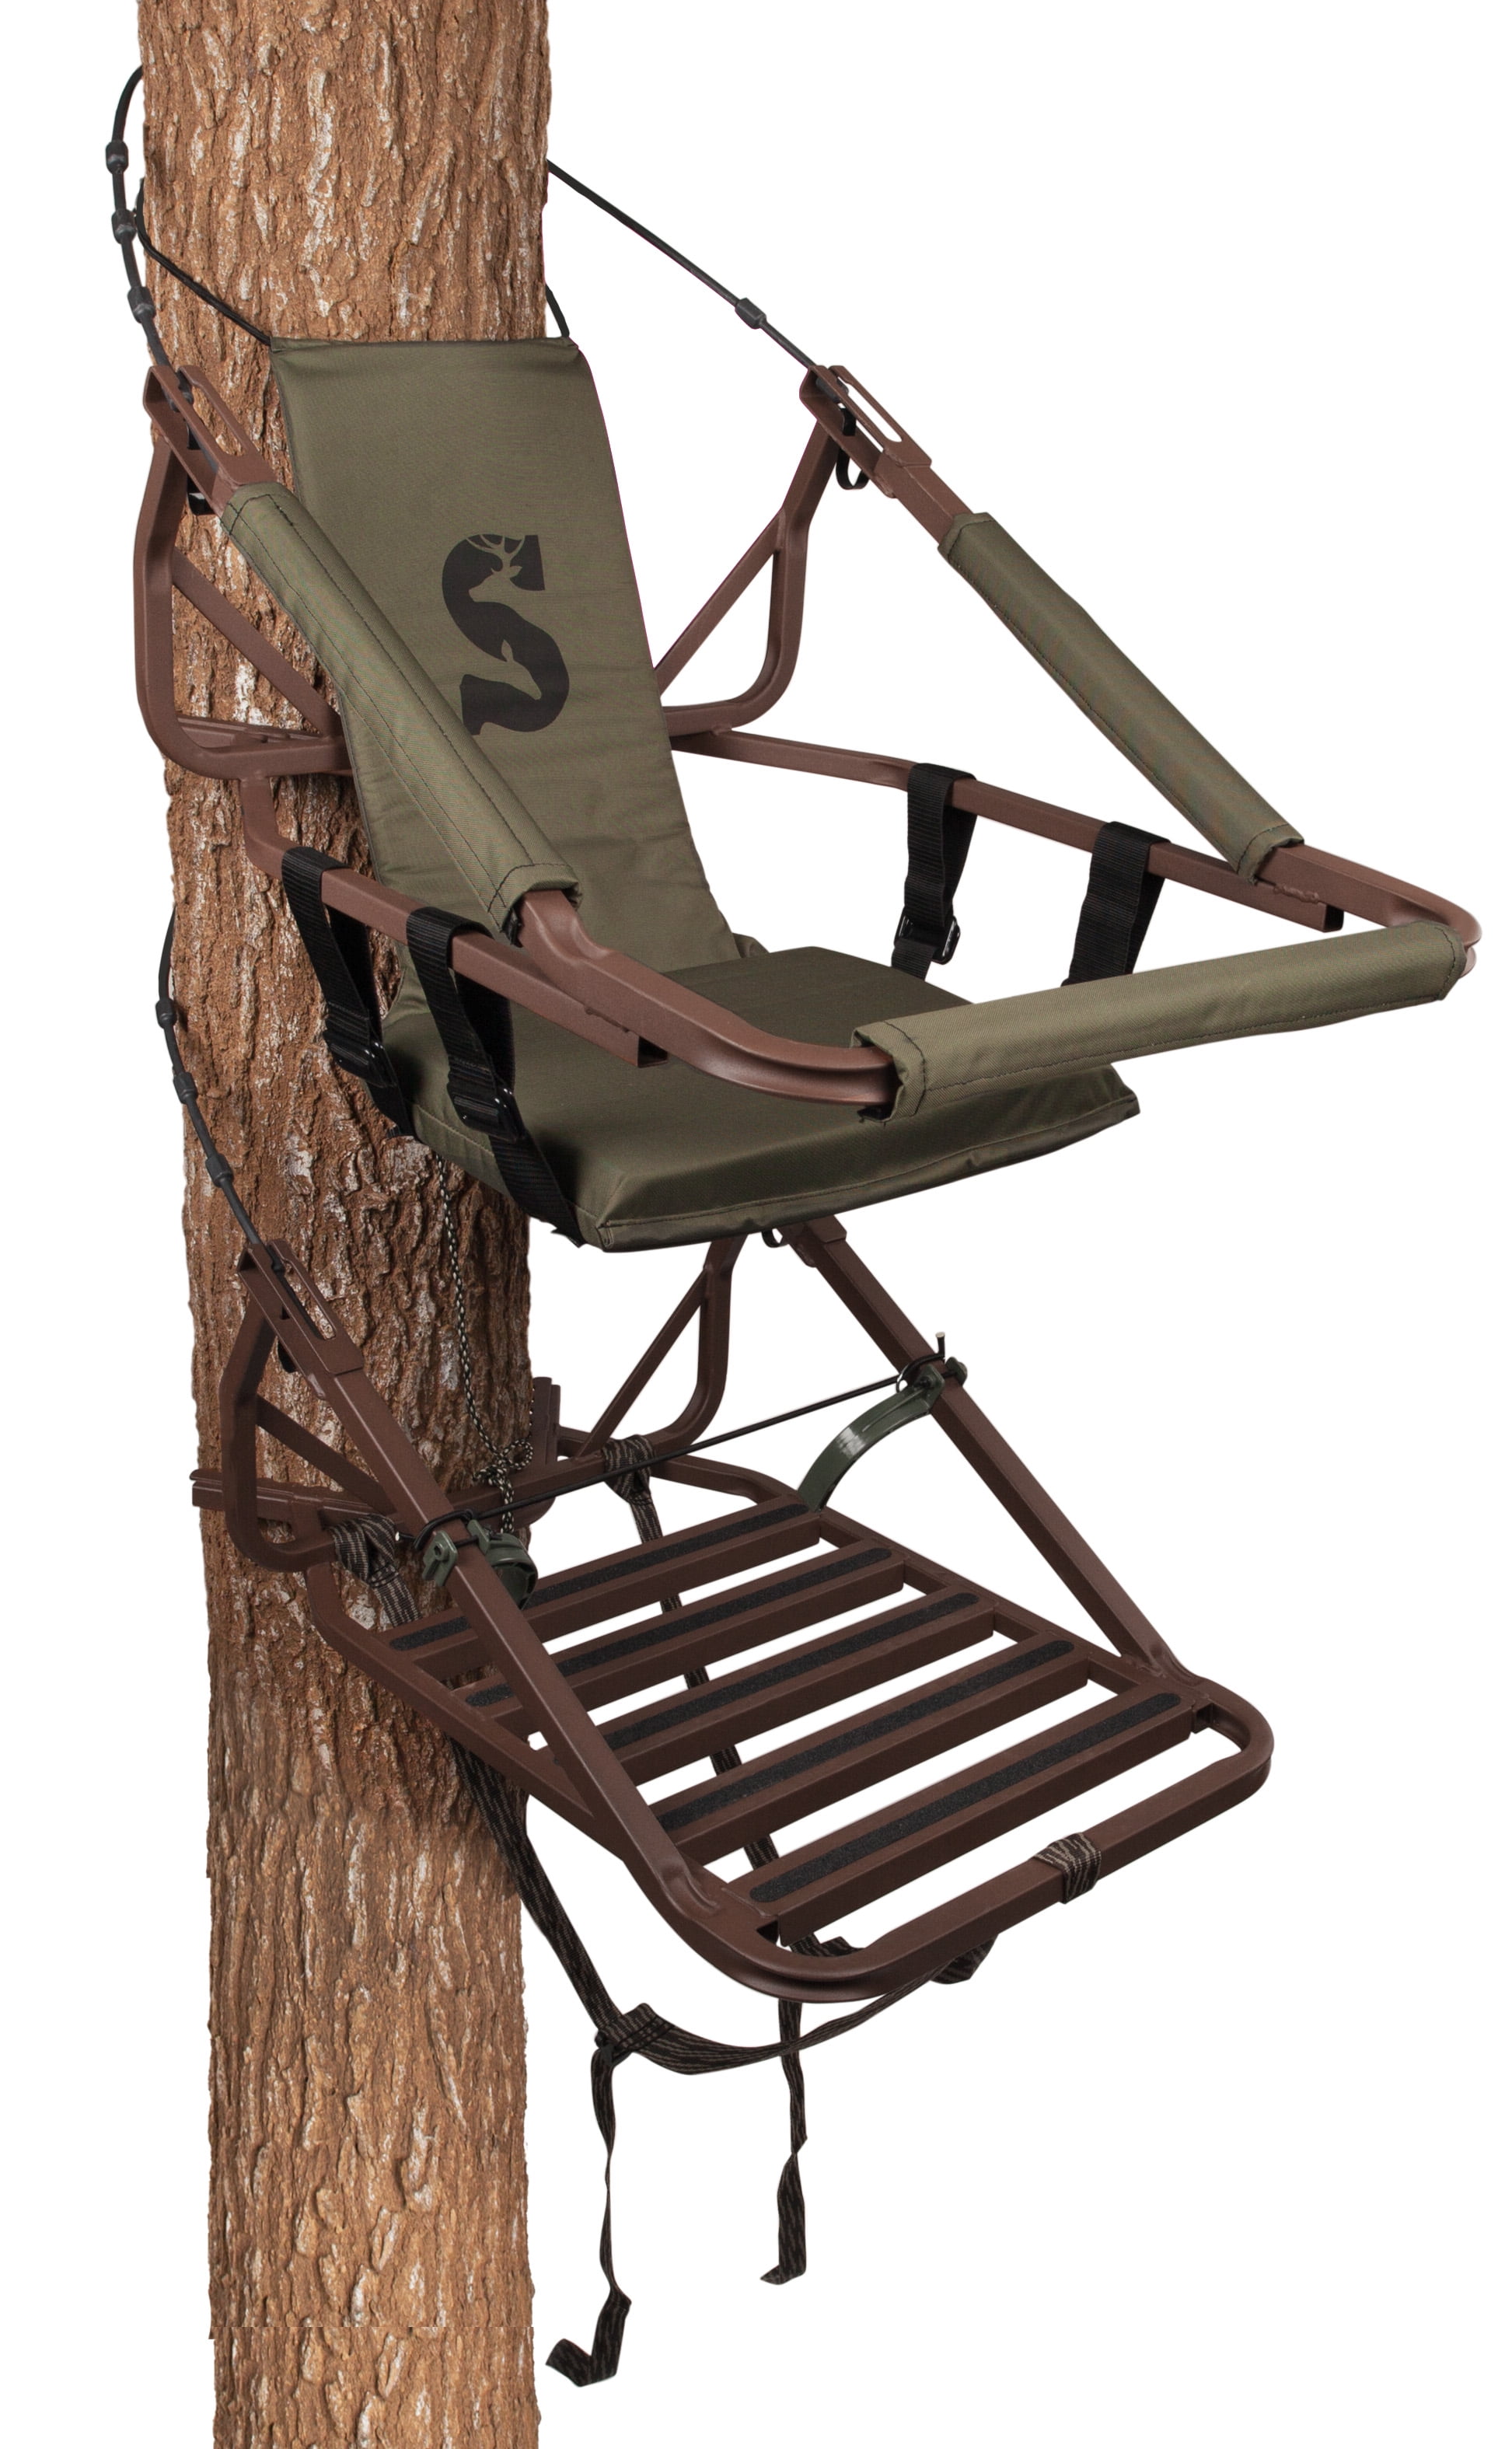 Summit Treestands Universal Tree Stand Seat Mossy Oak Camo Rubber Coated 